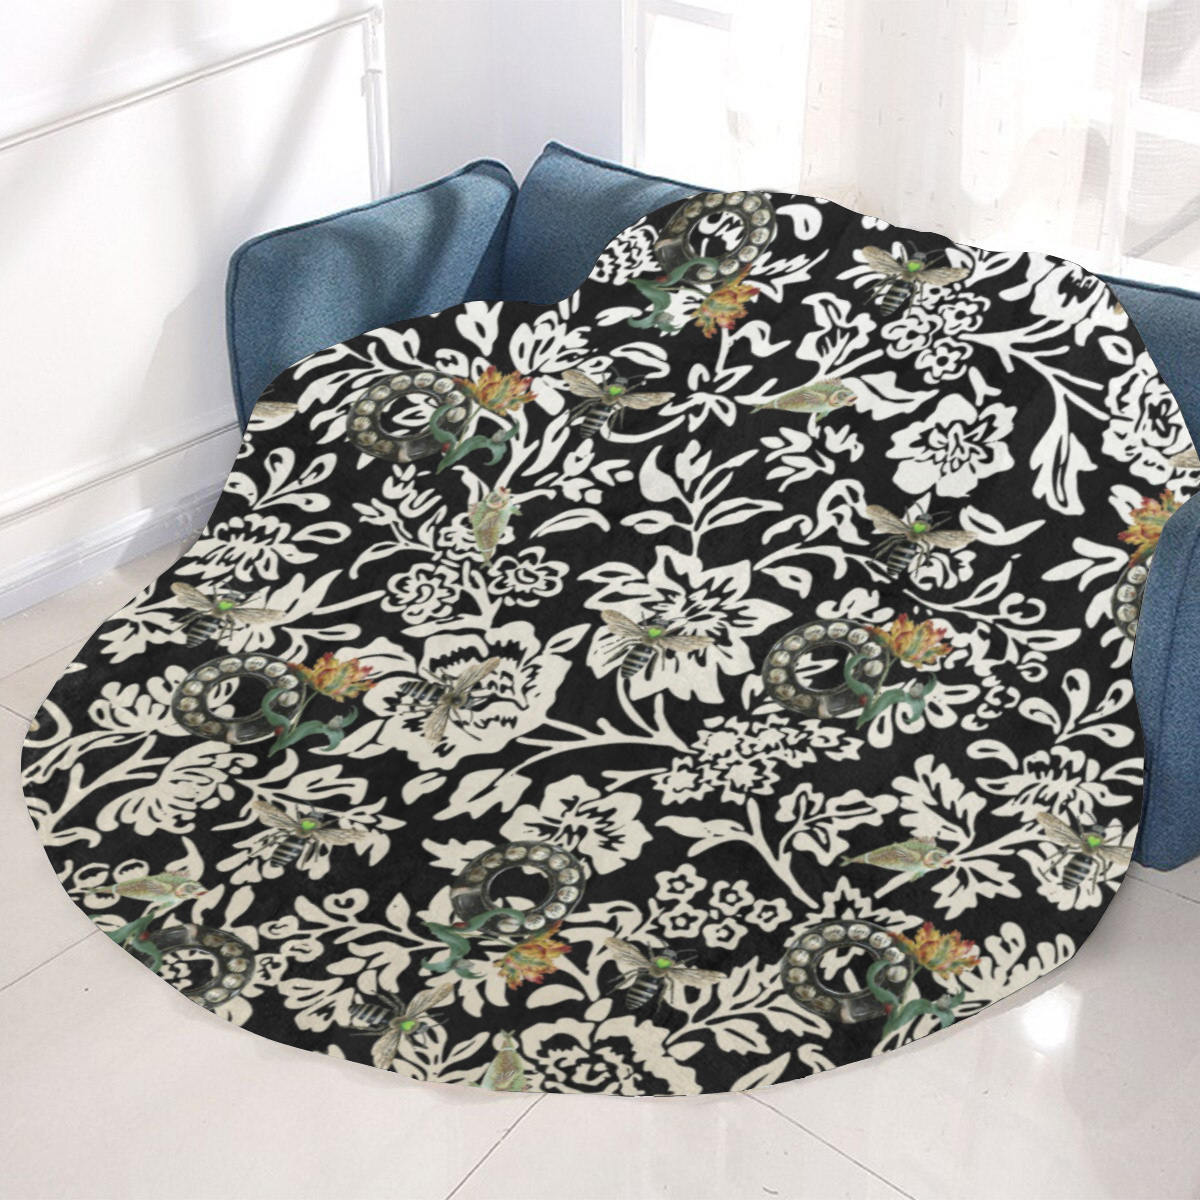 Just Bees and Dials and Fish and Tulips Circular Ultra-Soft Micro Fleece Blanket 60"